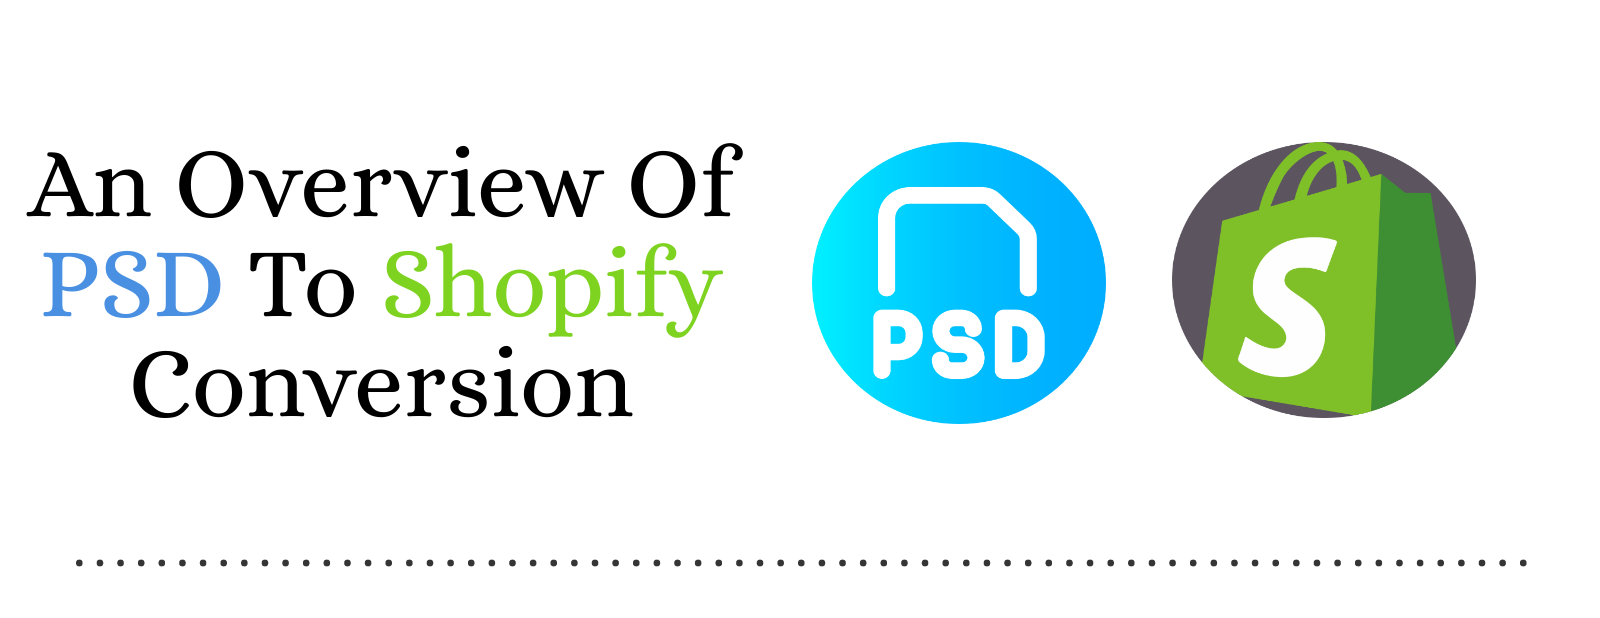 PSD To Shopify